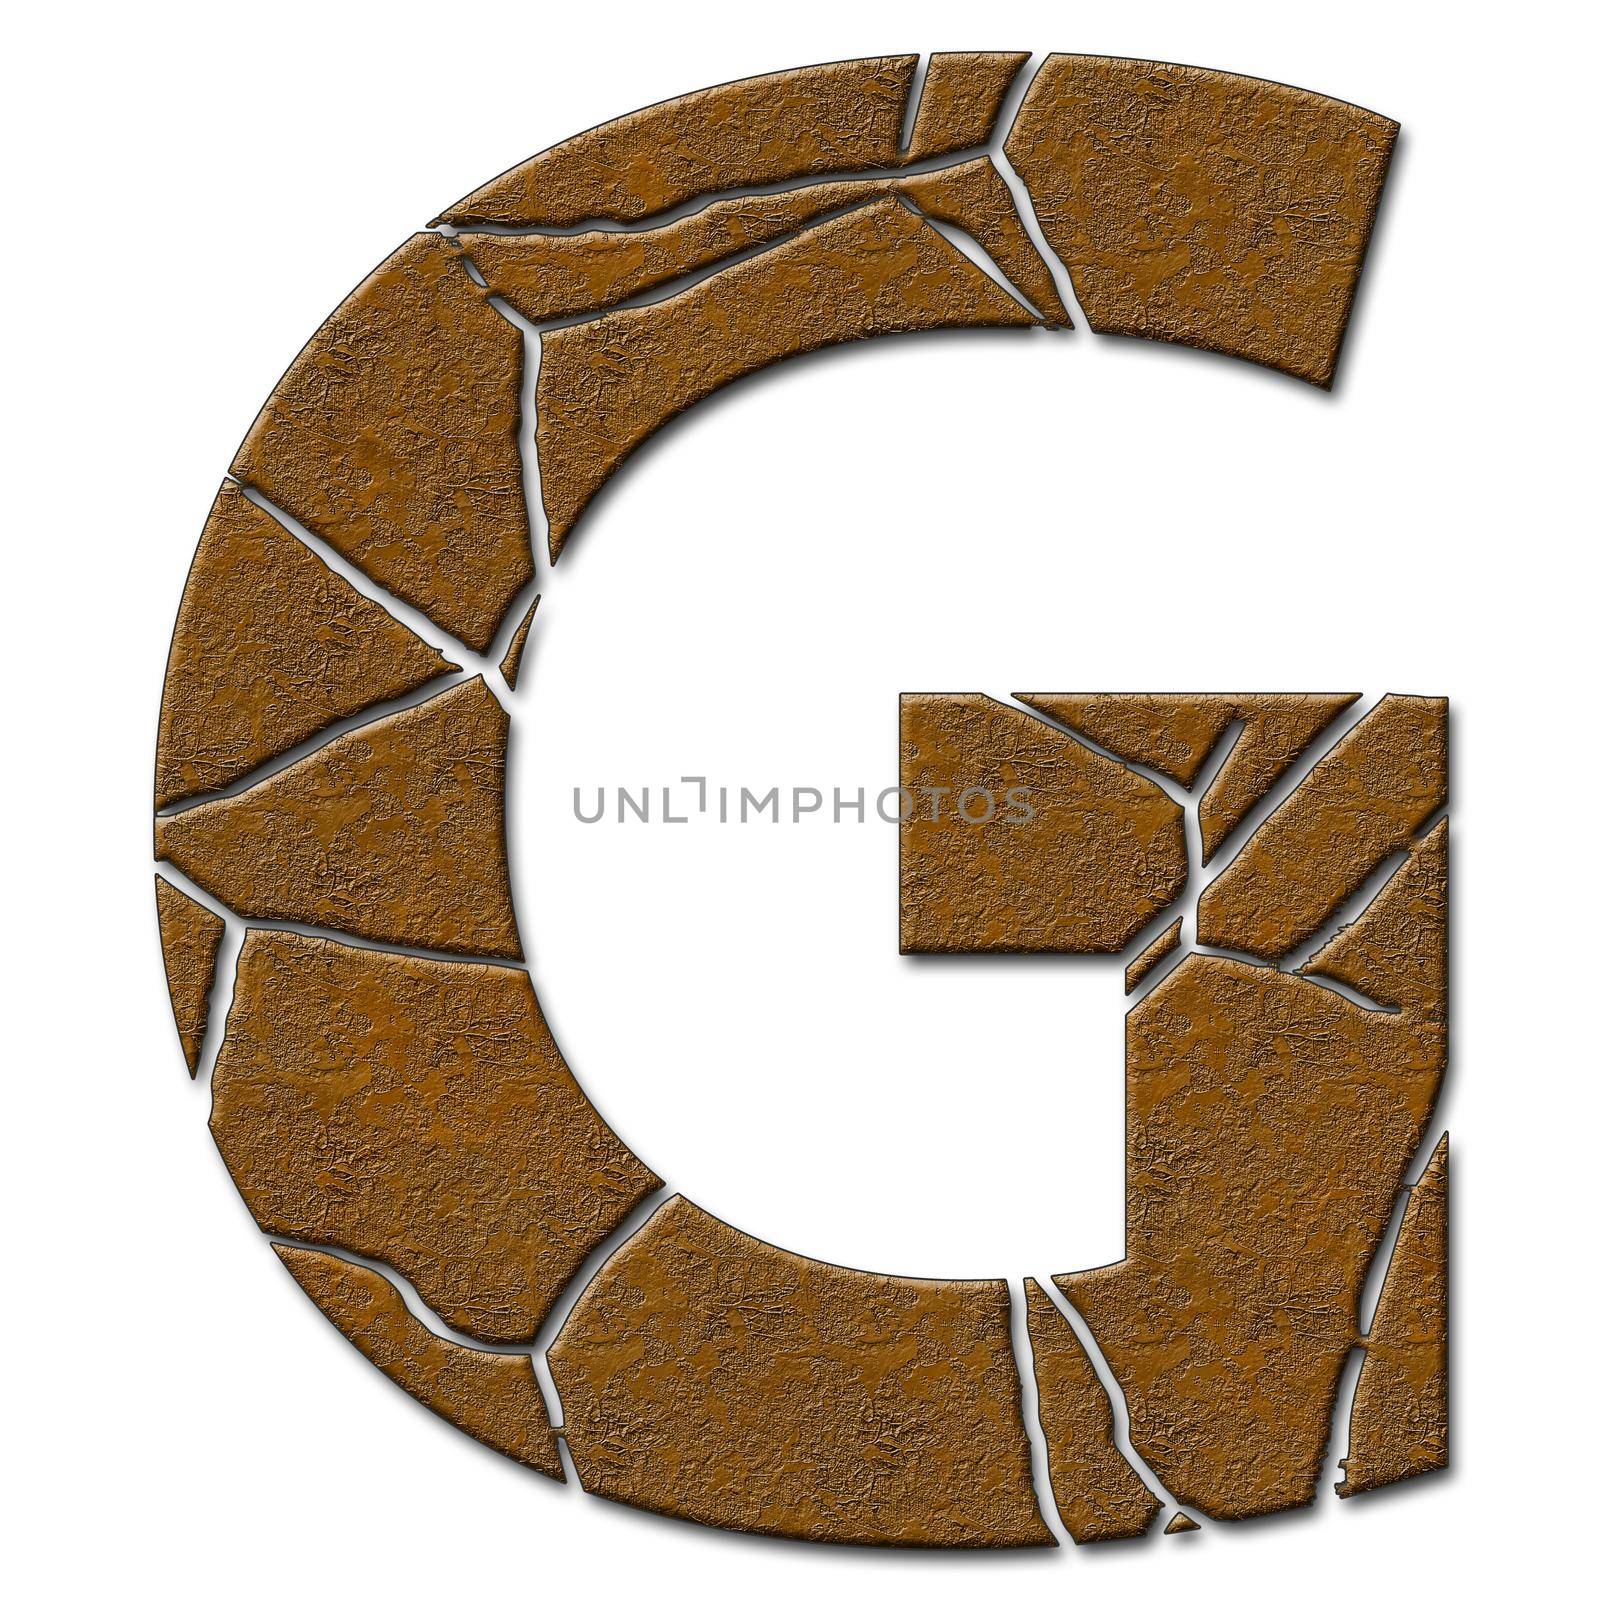 3D render of alphabet capital letter with cracks by stocklady